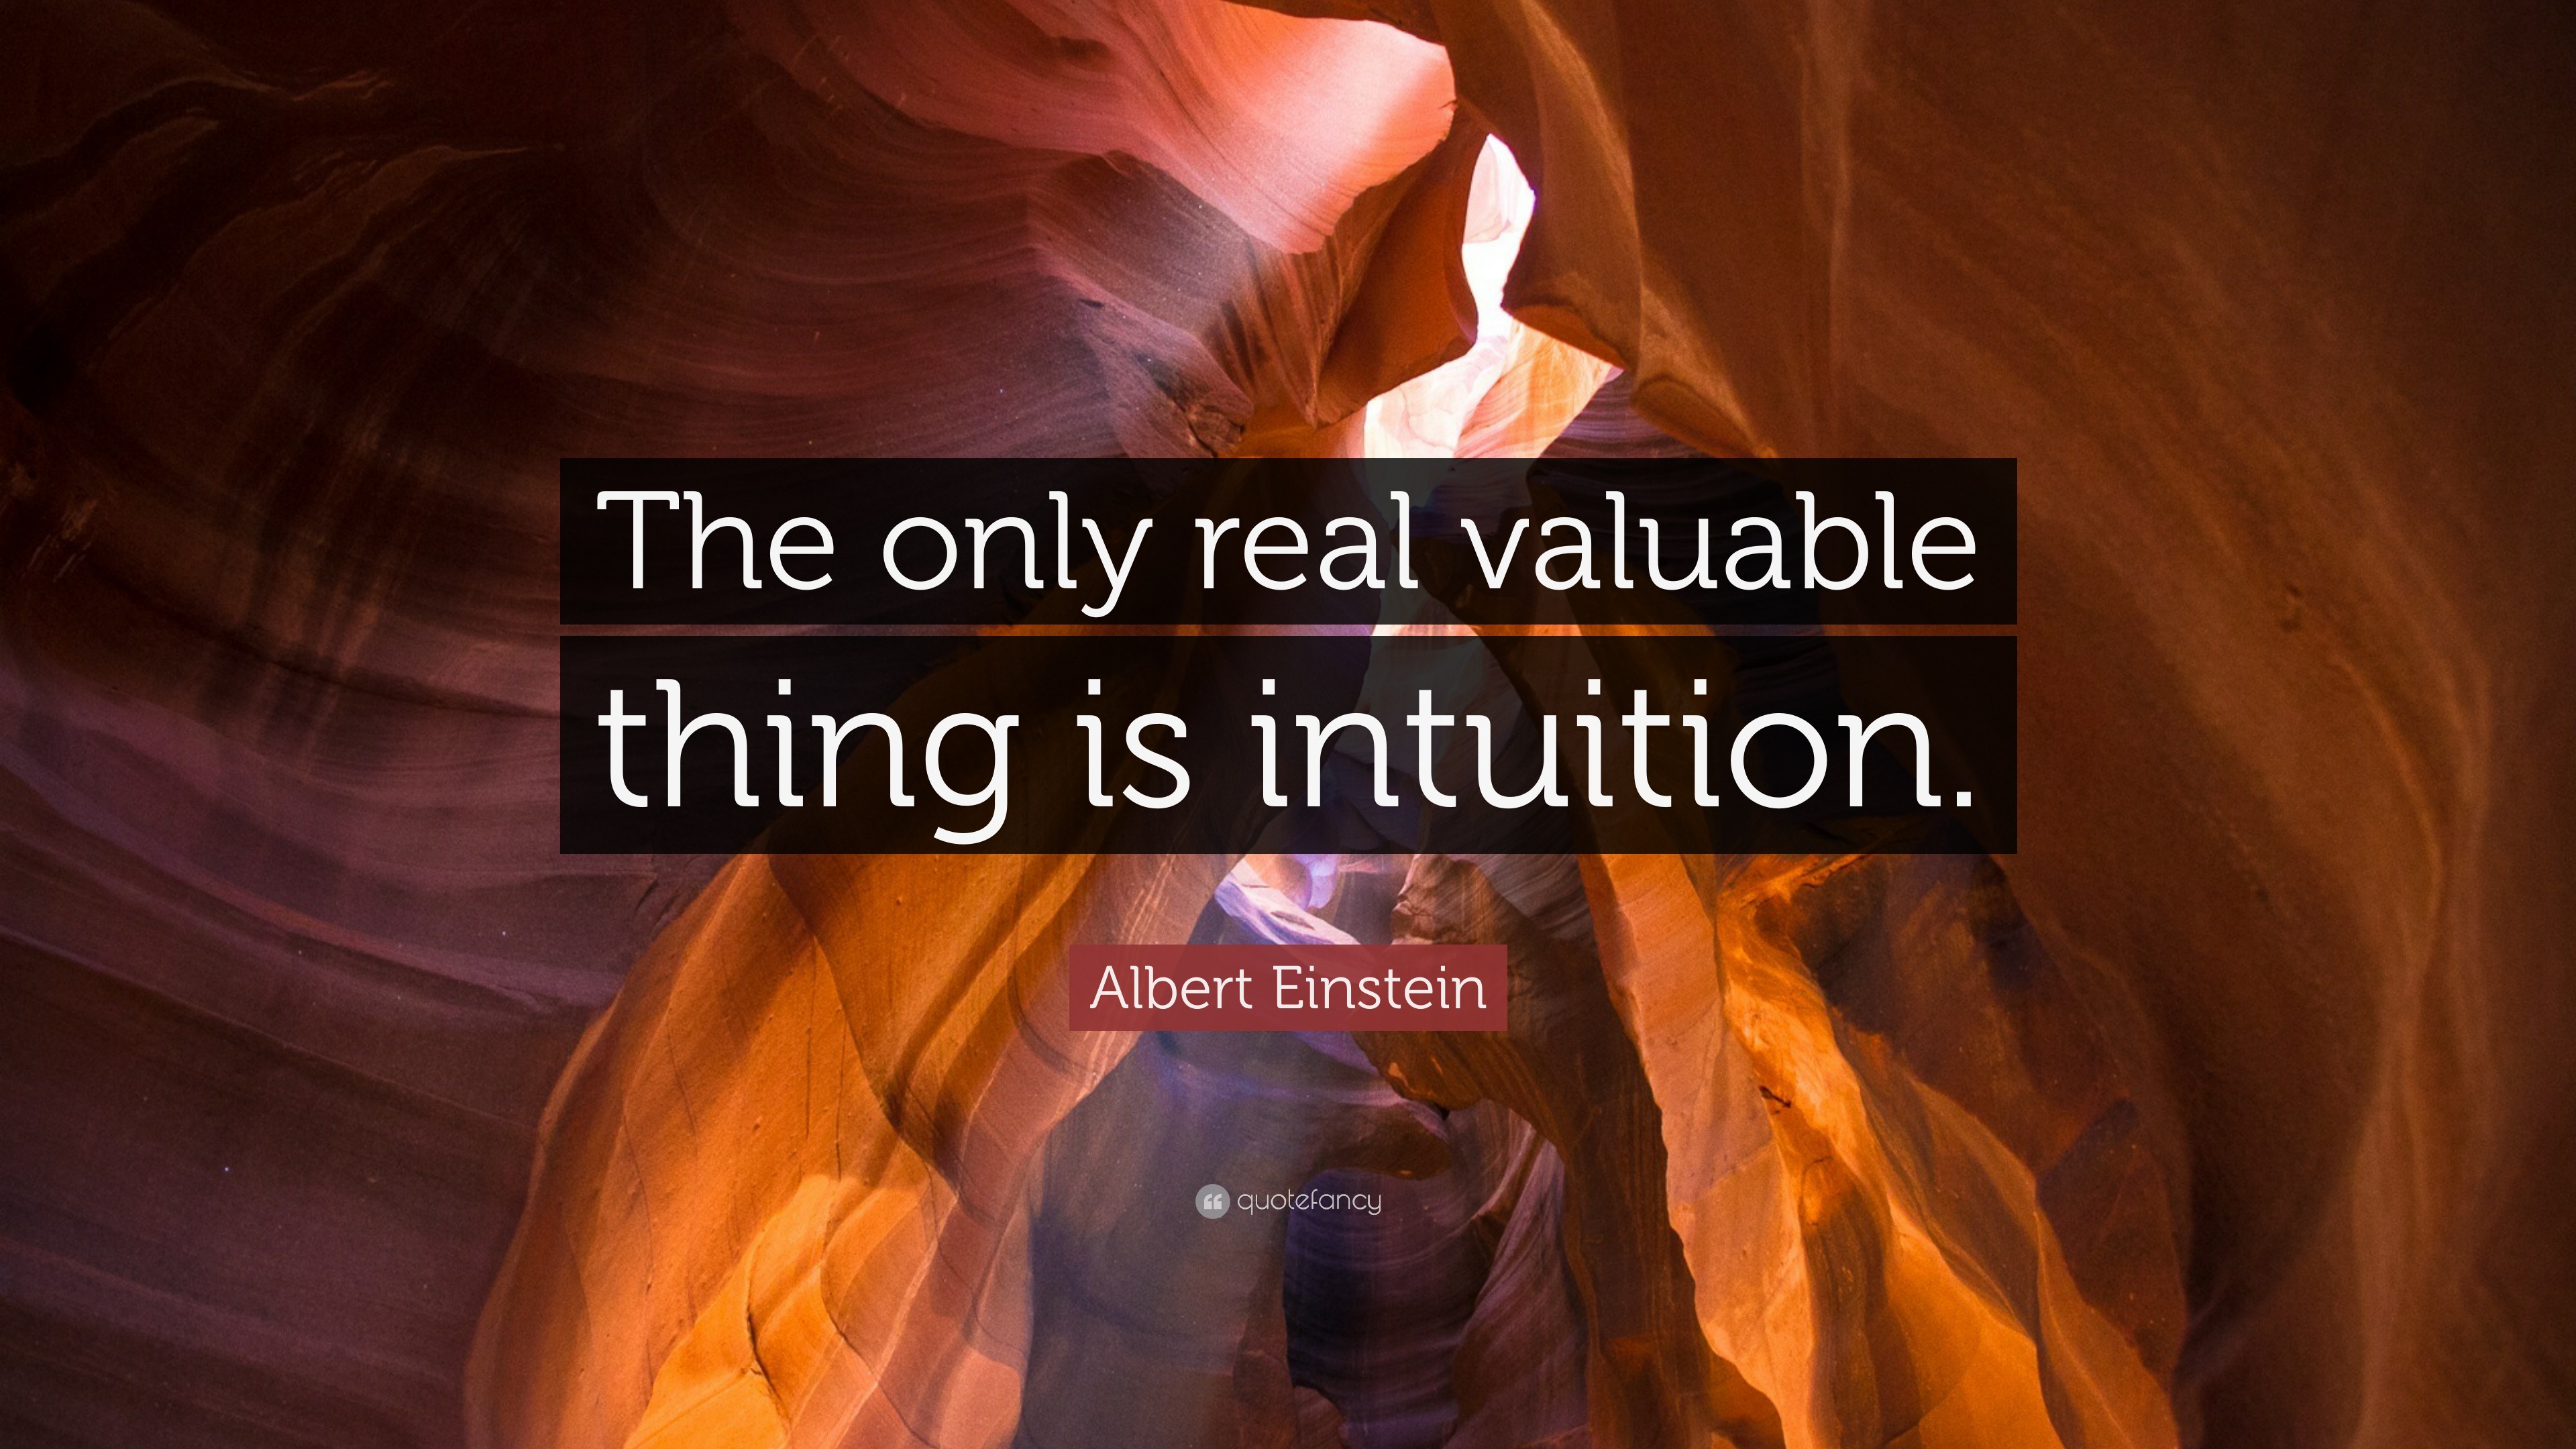 Albert Einstein Quote “The only real valuable thing is intuition.”